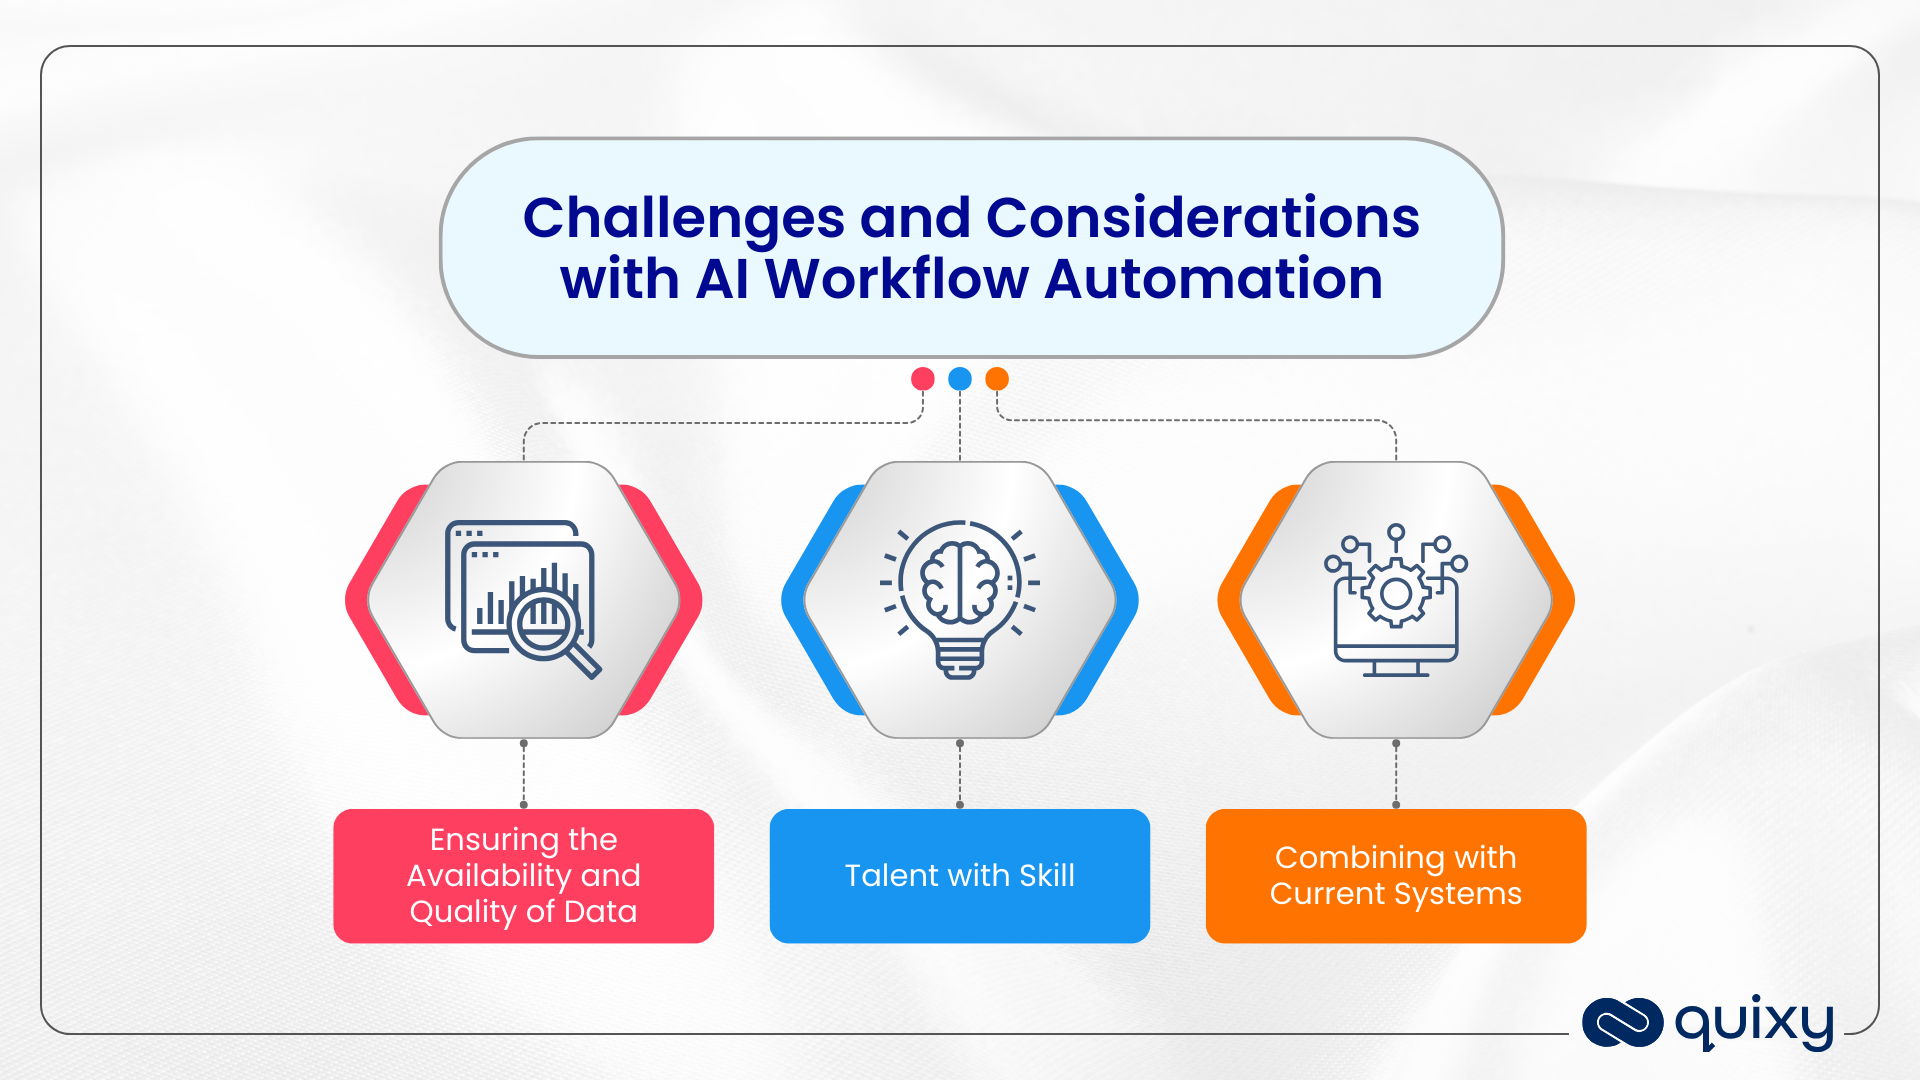 Challenges and Considerations with AI Workflow Automation